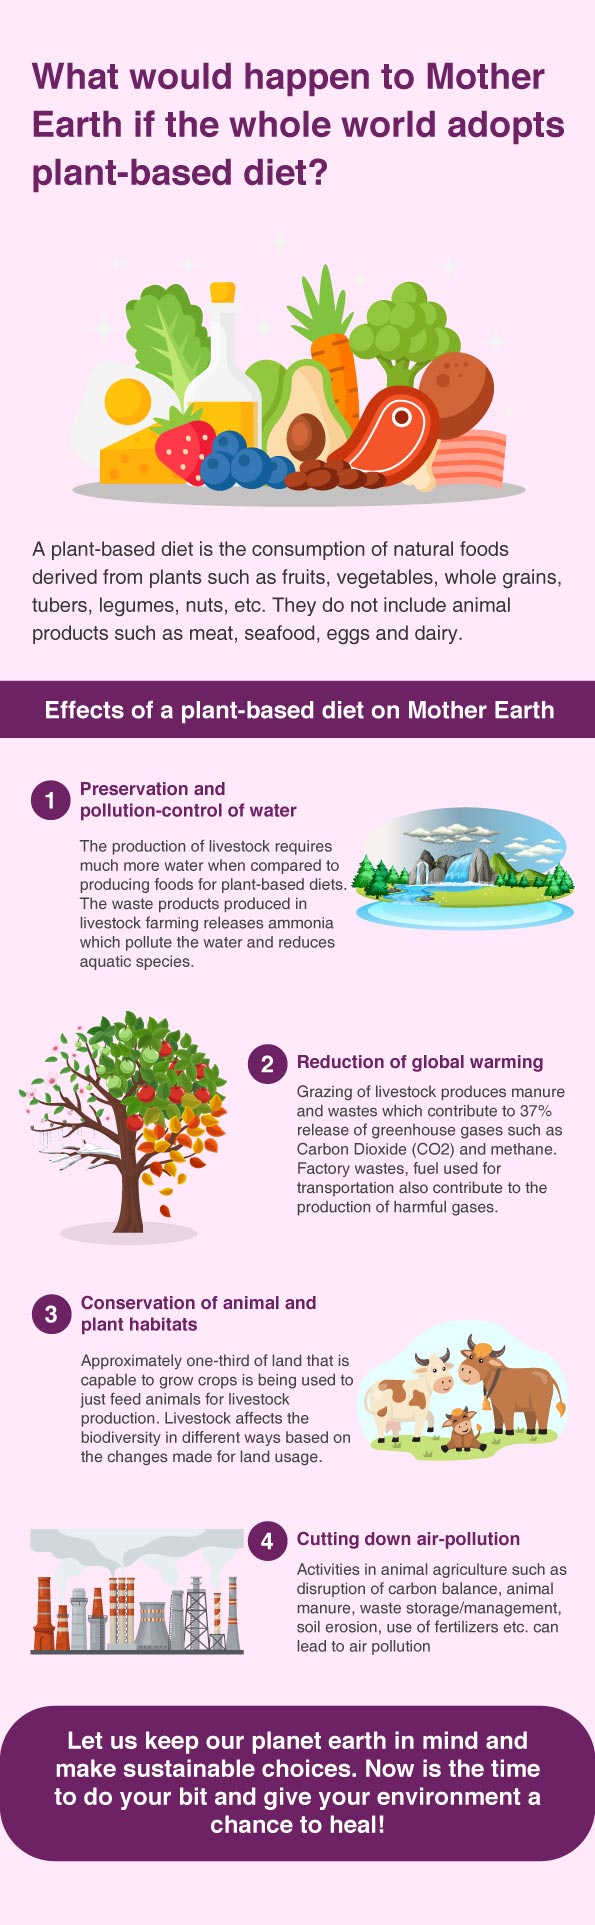 https://www.startright.info/wp-content/uploads/2021/06/What-would-happen-to-Mother-Earth.jpg